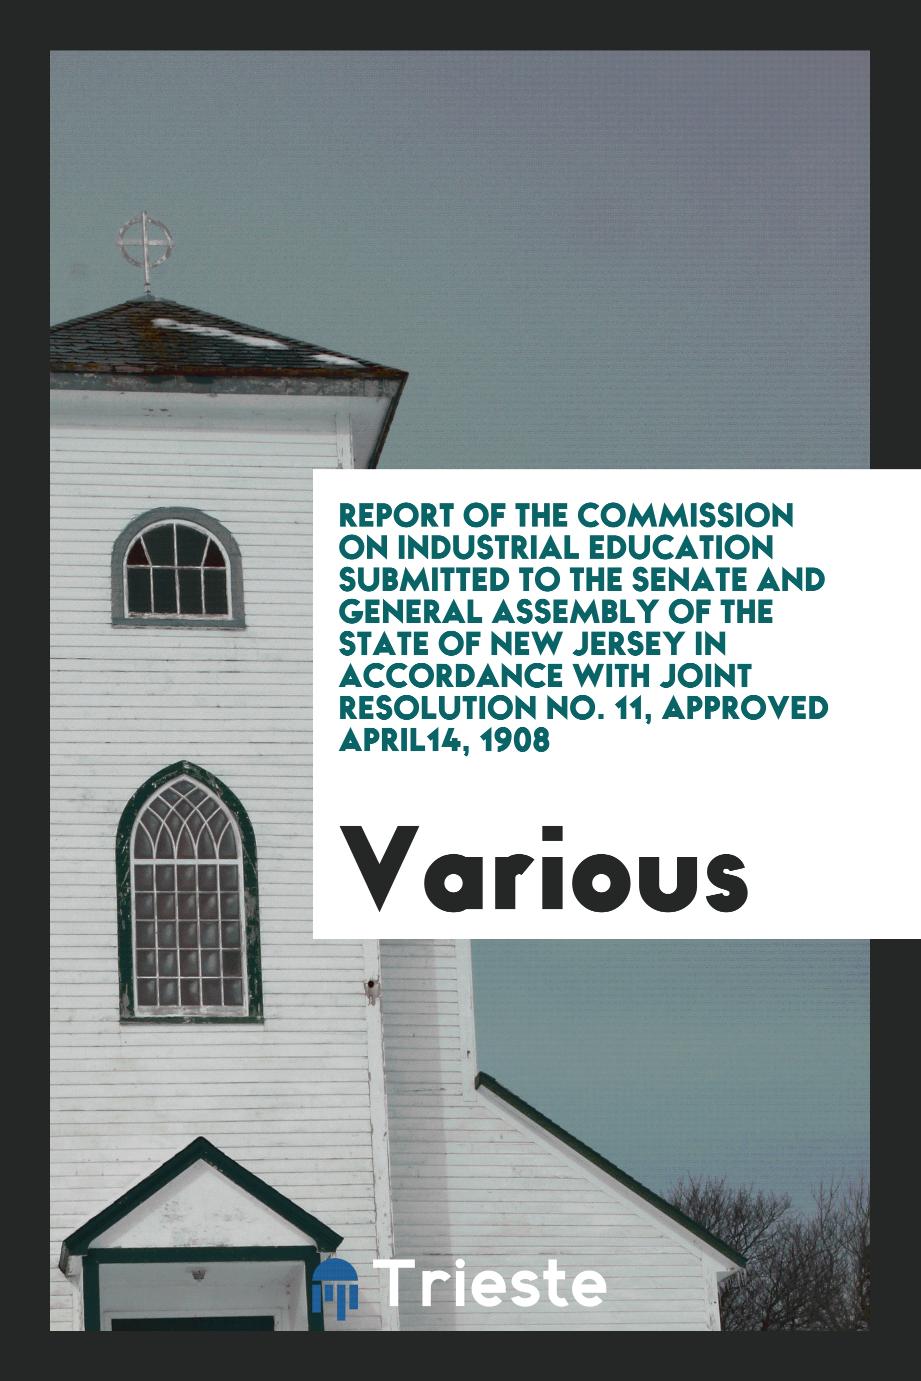 Report of the Commission on Industrial Education Submitted to the Senate and General Assembly of the State of New Jersey in Accordance with Joint Resolution No. 11, Approved april14, 1908